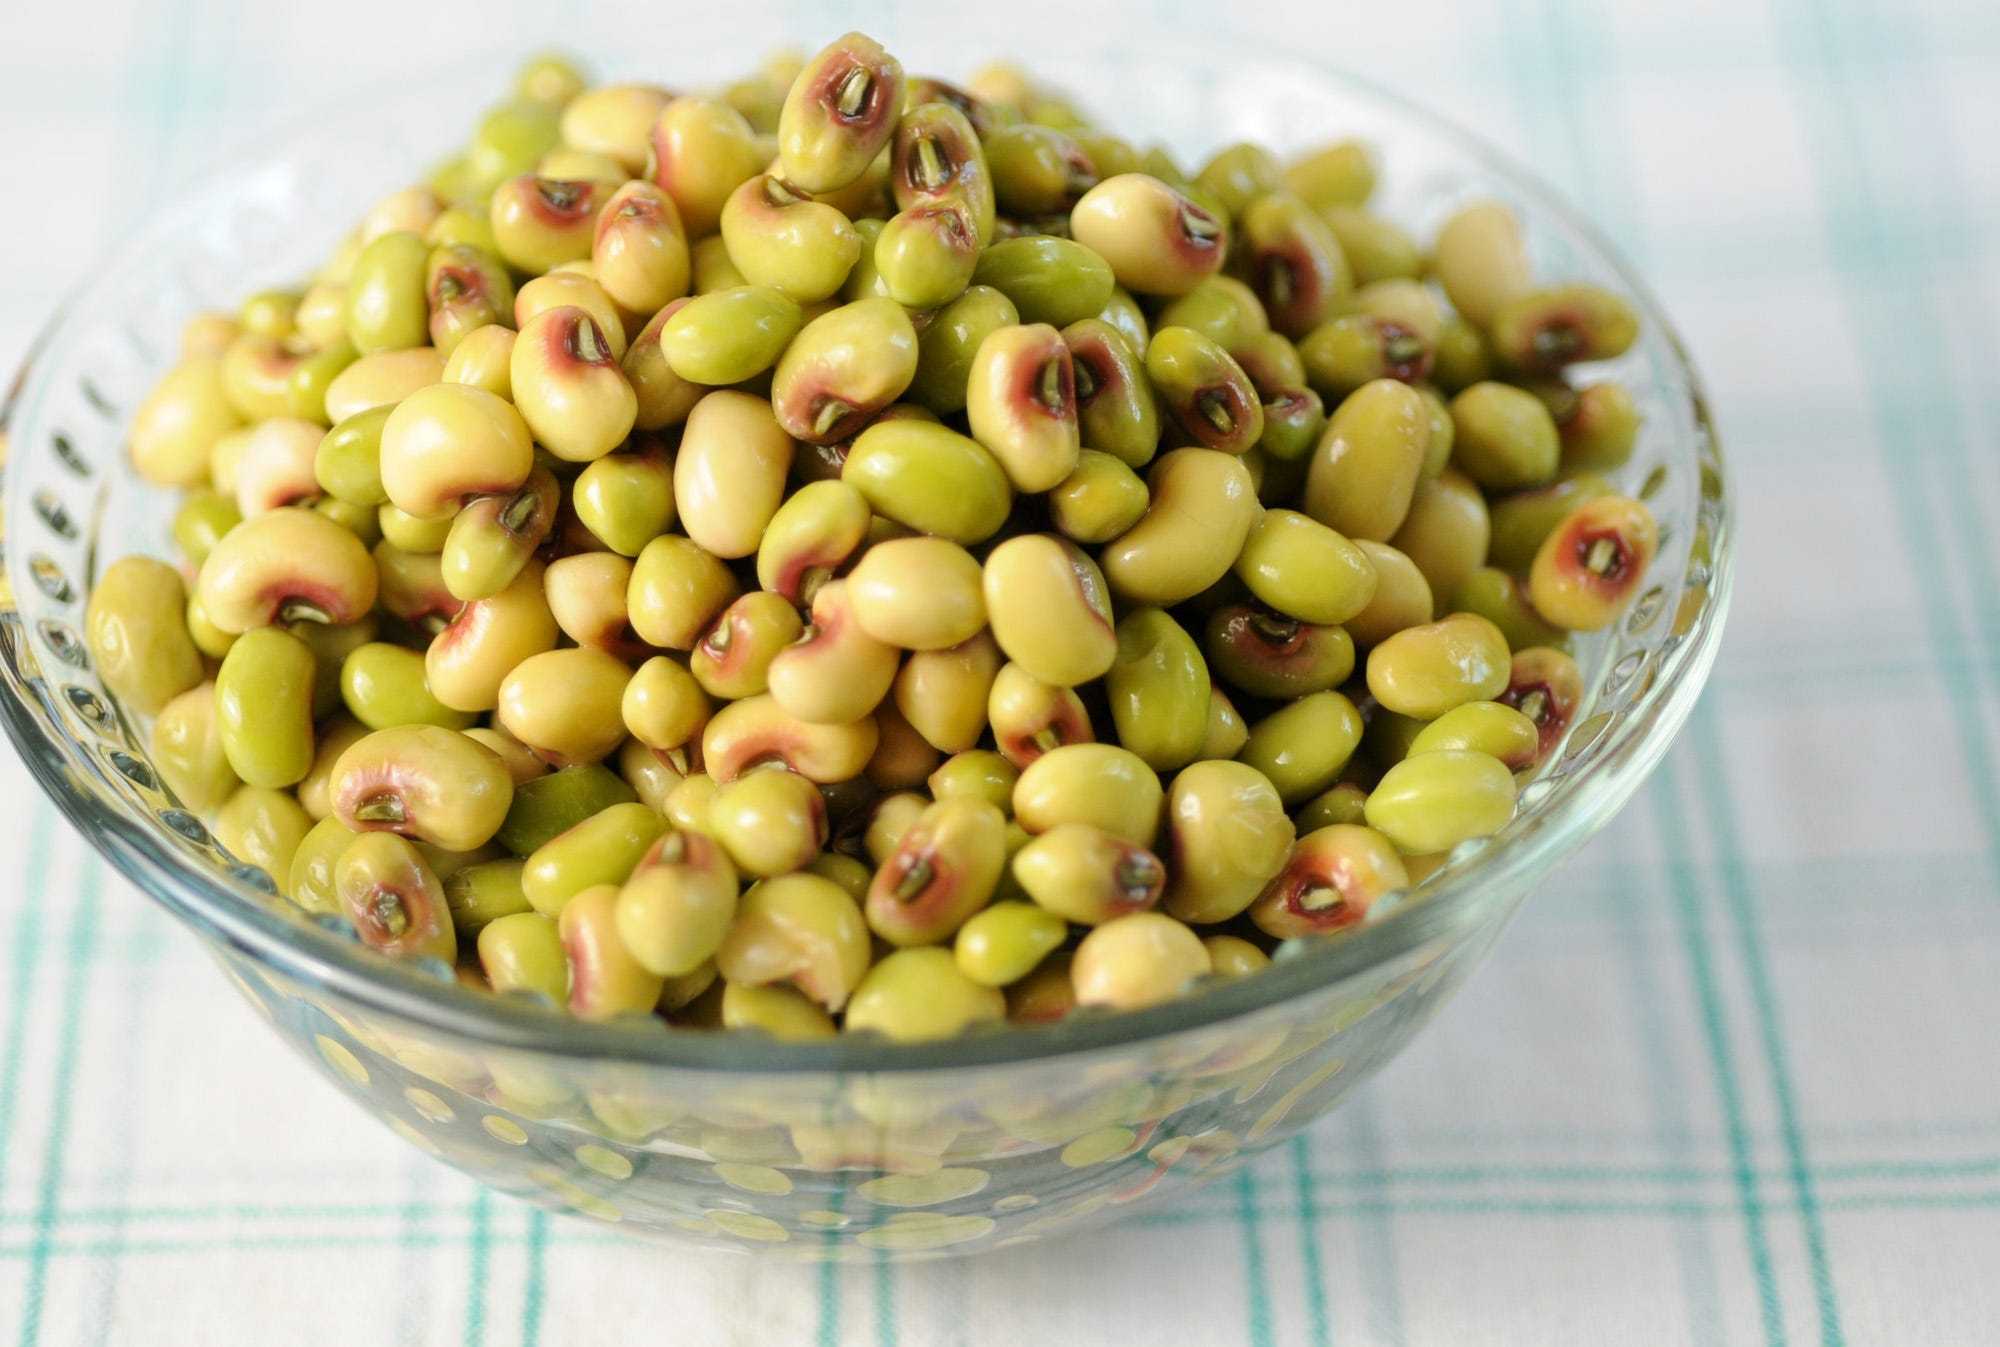 Pink-eye peas good for both traditional and experimental recipes